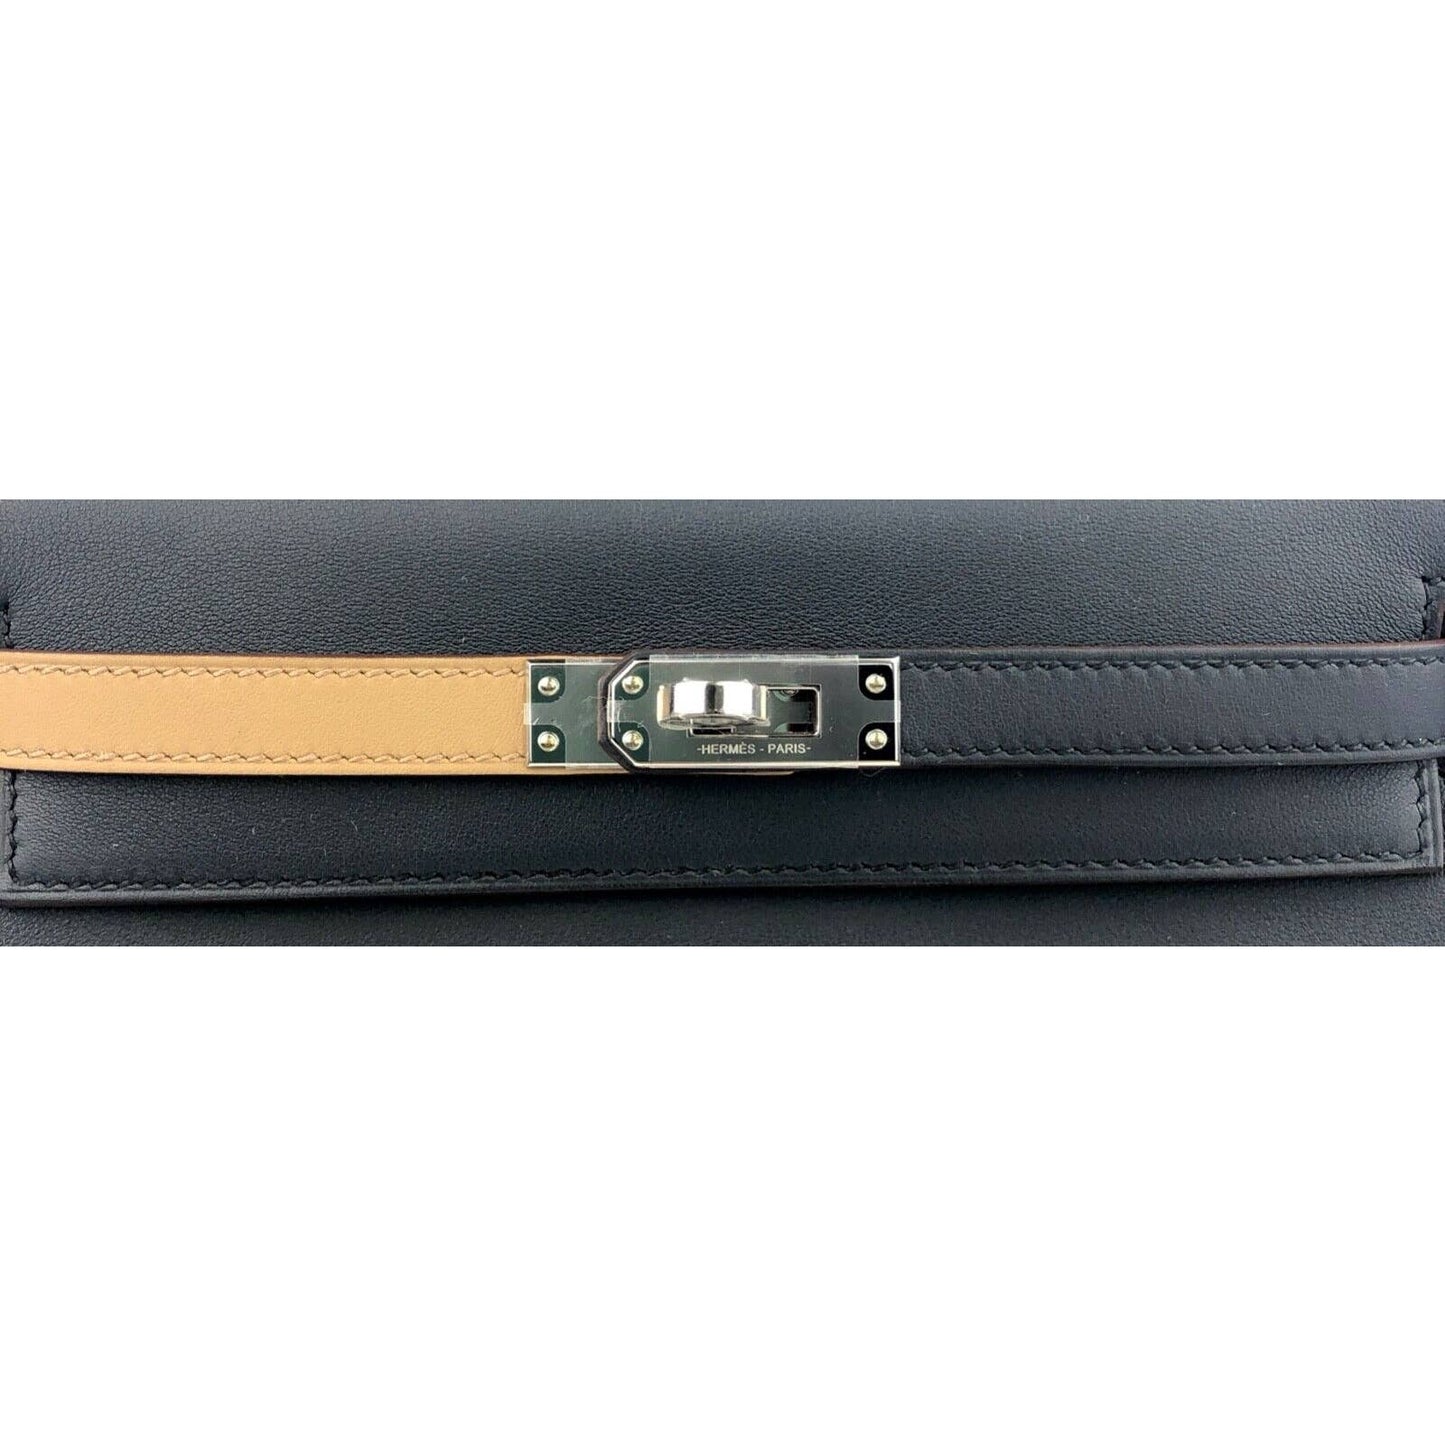 Hermes Kelly 25 Colormatic Blue Black Chai Gold Leather Palladium Hardware